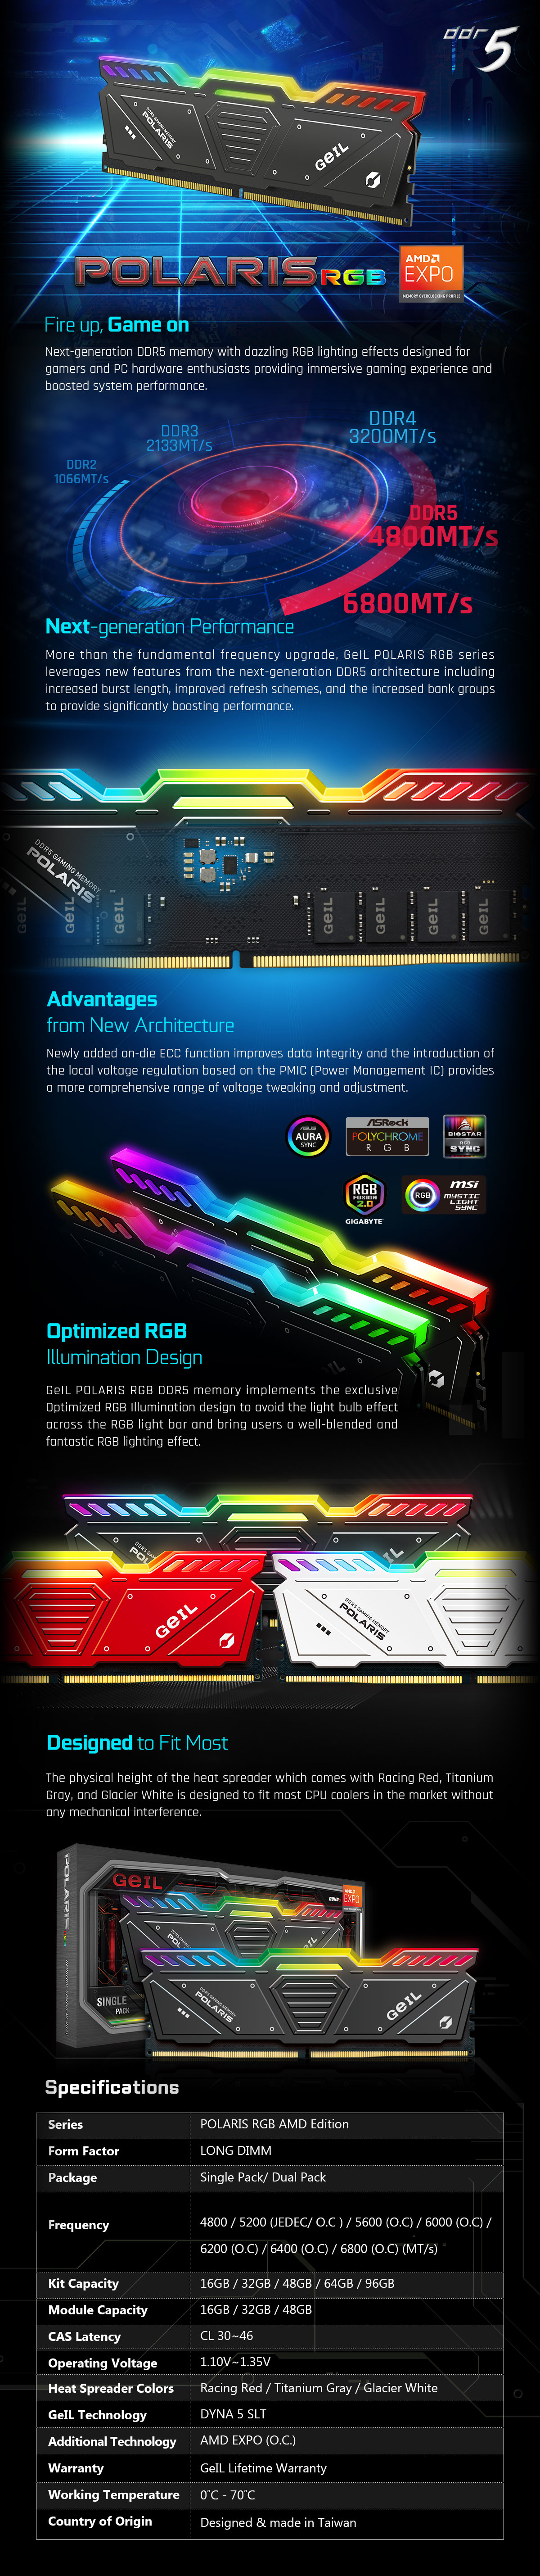 A large marketing image providing additional information about the product GeIL 32GB Kit (2x16GB) DDR5 Polaris AMD Edition RGB C38 6000MHz - Grey - Additional alt info not provided